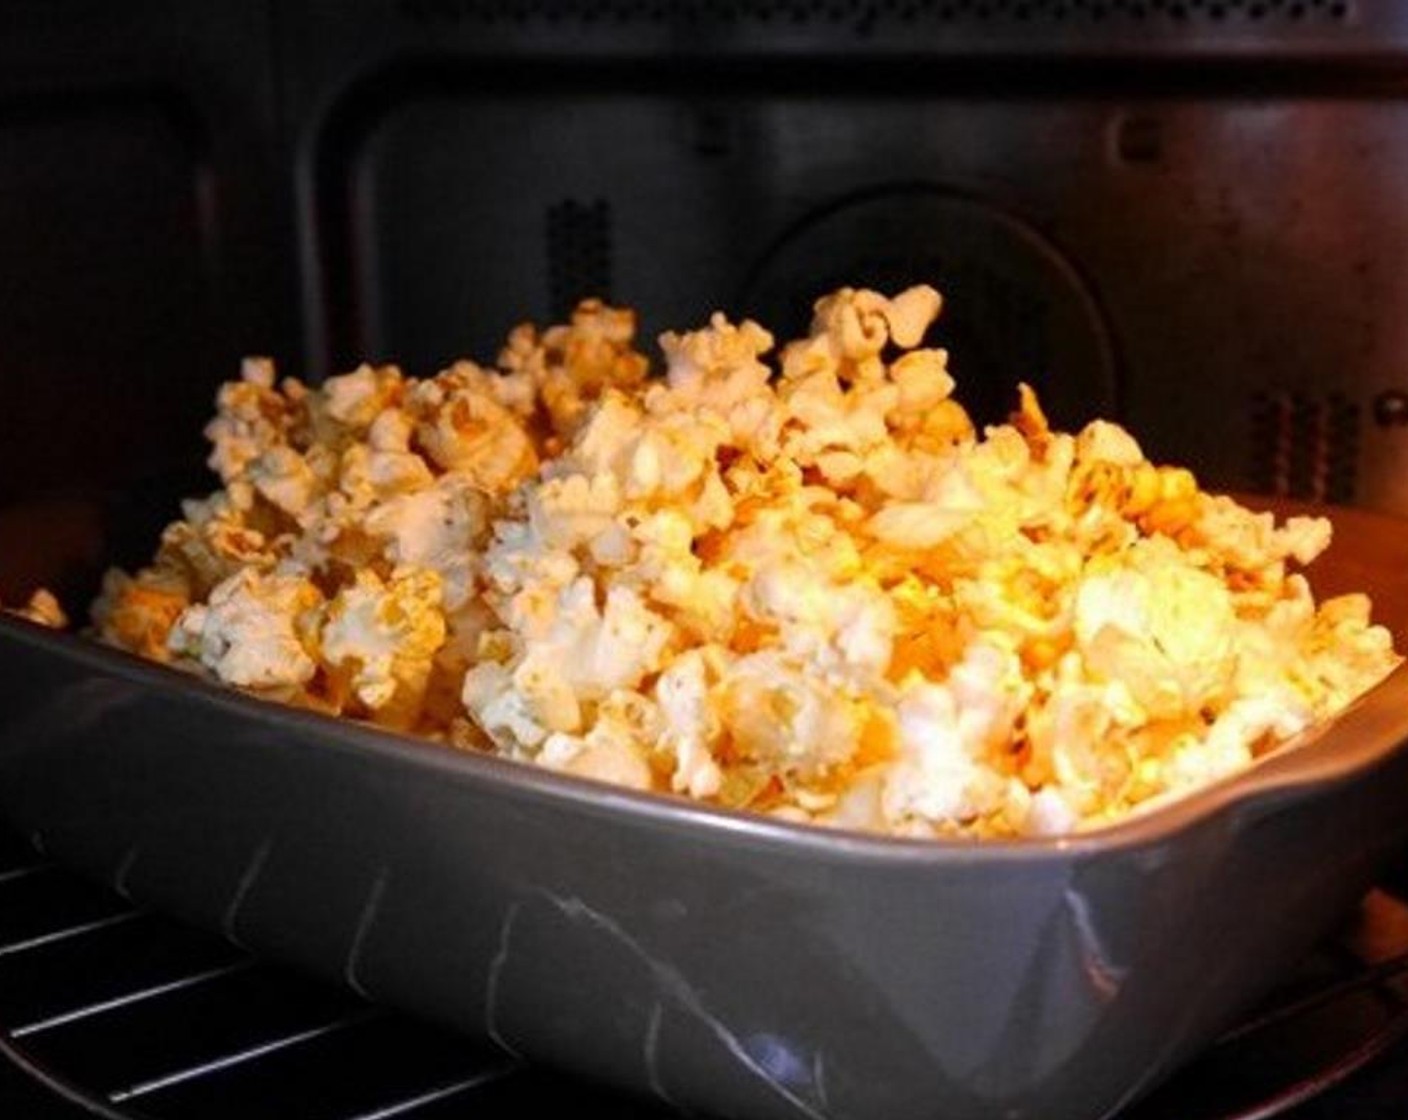 step 4 Place the popcorn on a tray and bake for 6 minutes at 300 degrees F (150 degrees C).